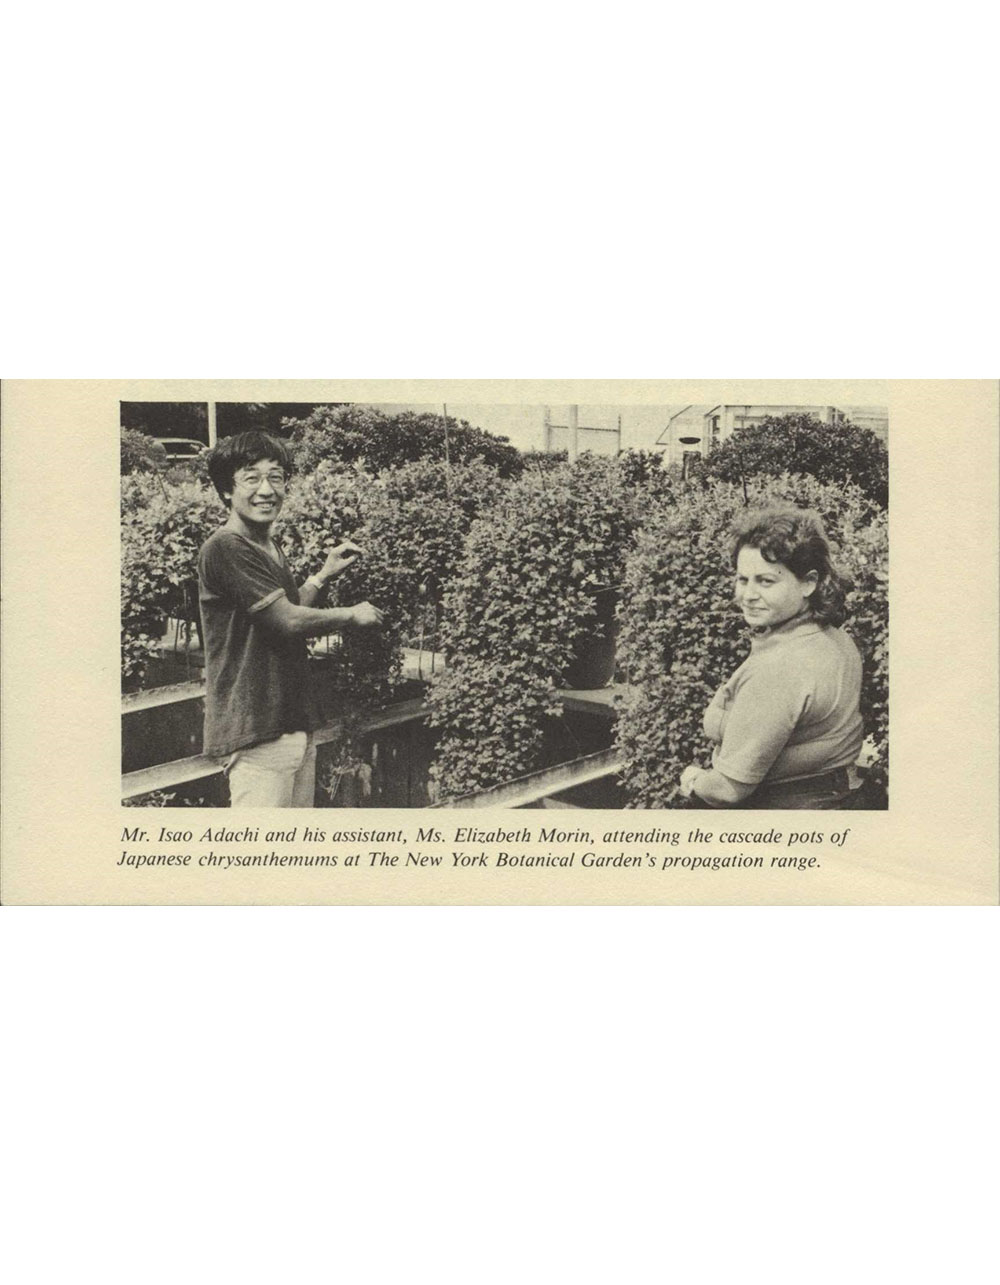 Kiku horticulturist Isao Adachi smiles at the camera and stands next to his assistant, Elizabeth Morin. Behind them are chrysanthemum flowers, which they are working on.